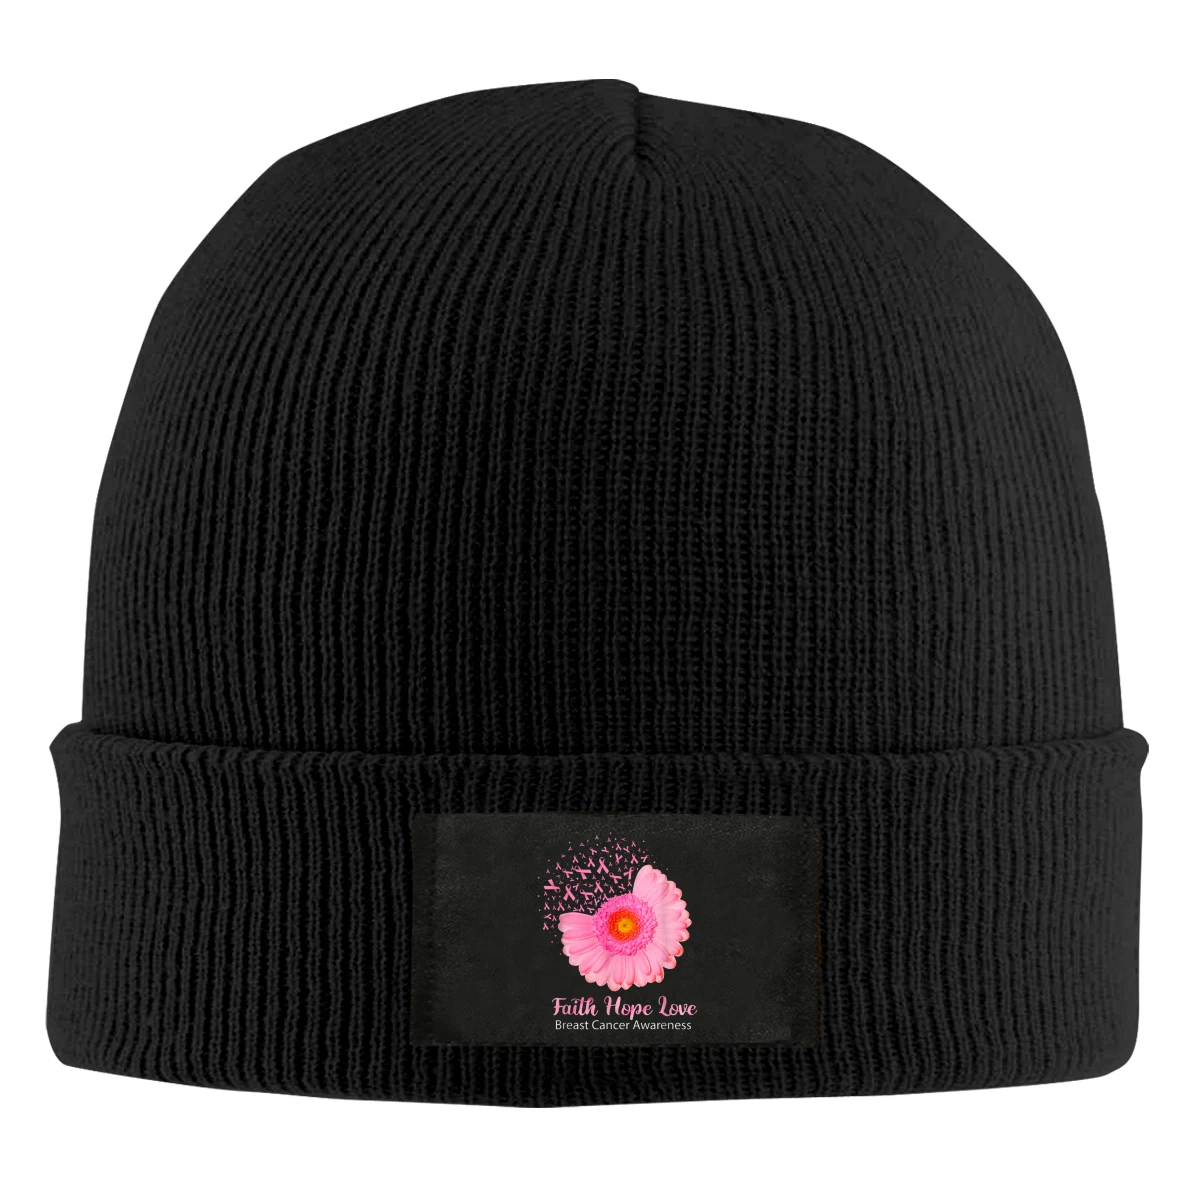 

Faith Hope Love Breast Cancer Awareness Flower Beanie Hats For Men Women With Designs Winter Slouchy Knit Skull Cap